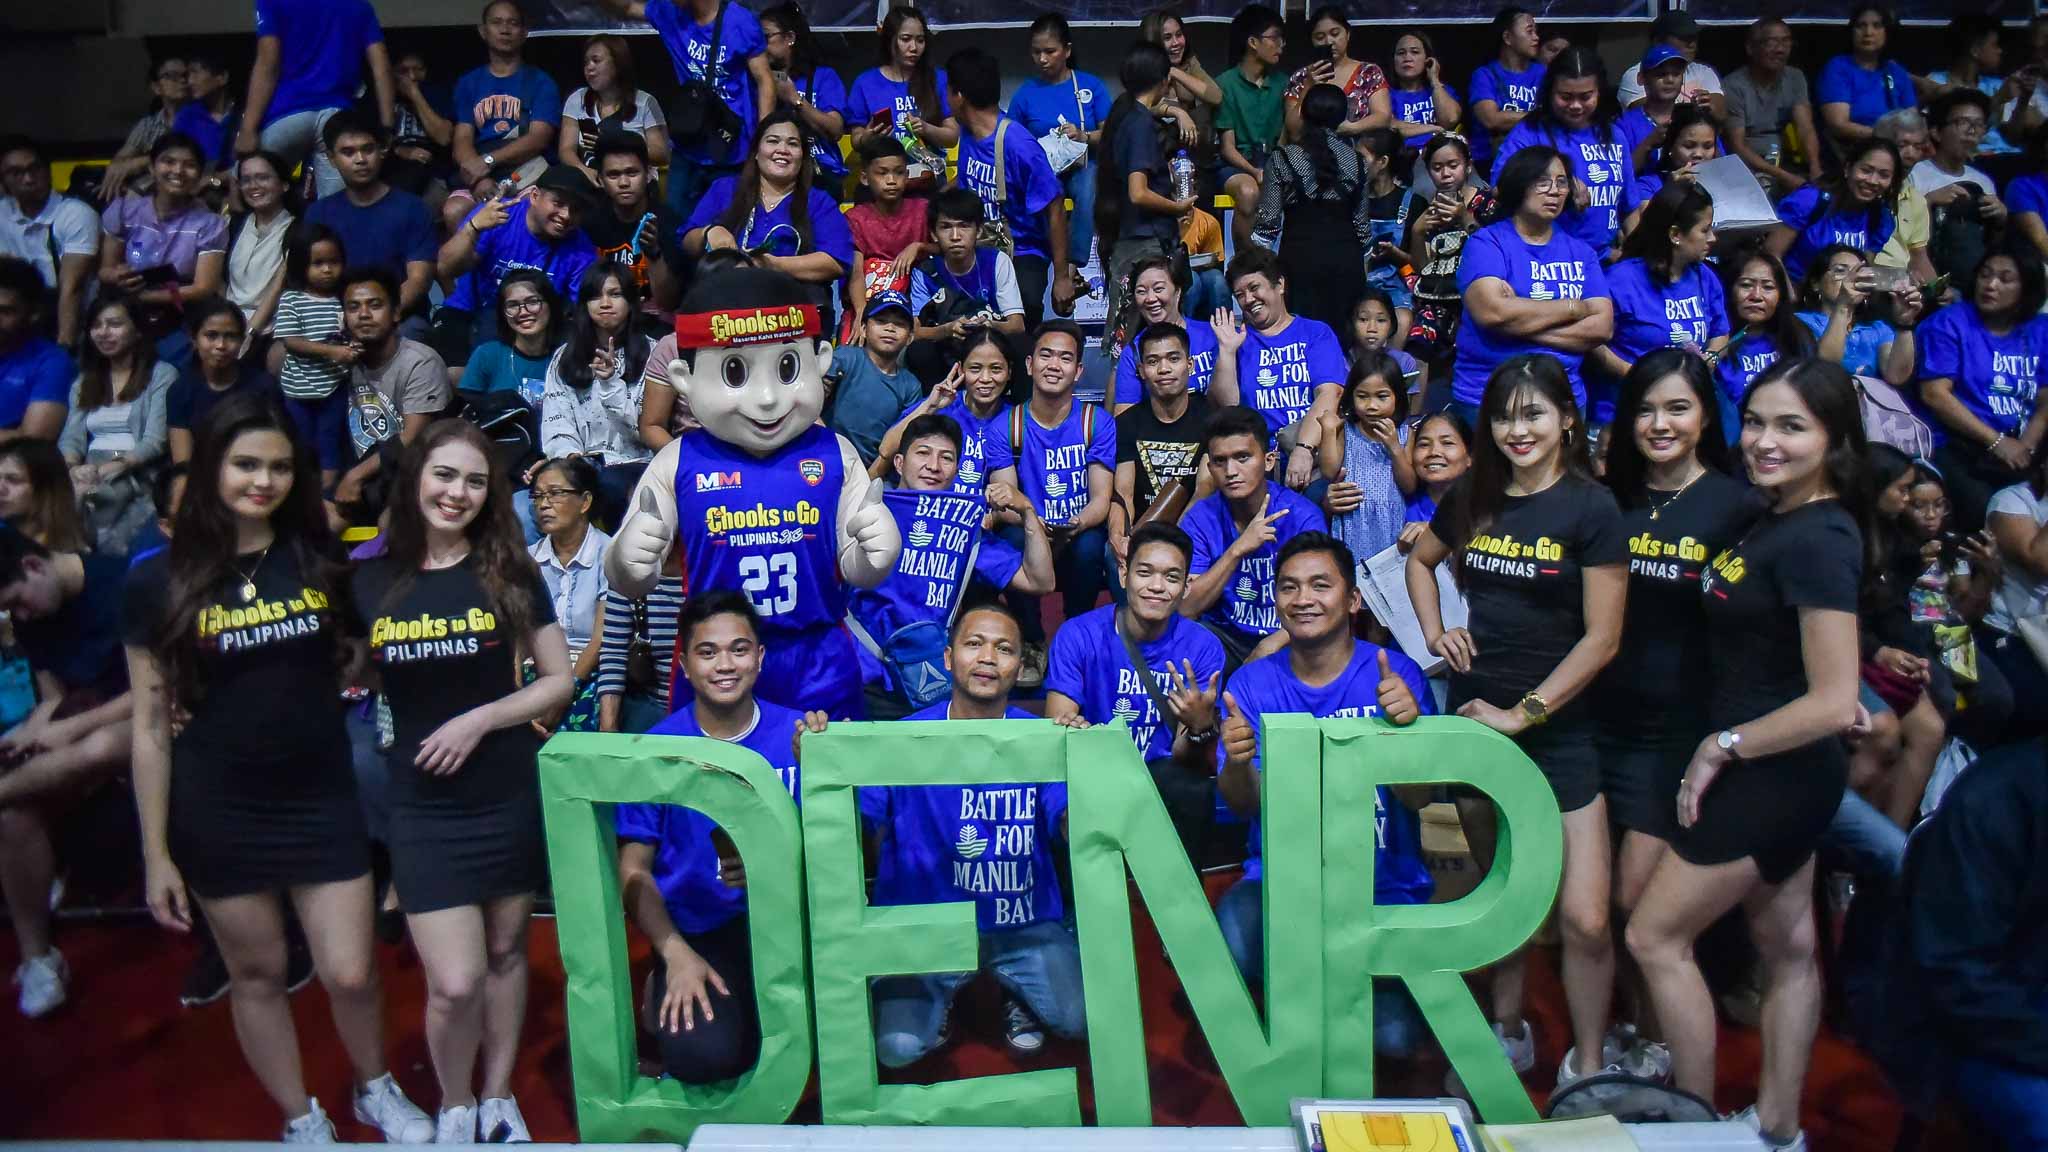 2020-UNTV-Cup-DENR-def-AFP UNTV Cup launches 9th season at Big Dome Basketball News UNTV Cup  - philippine sports news